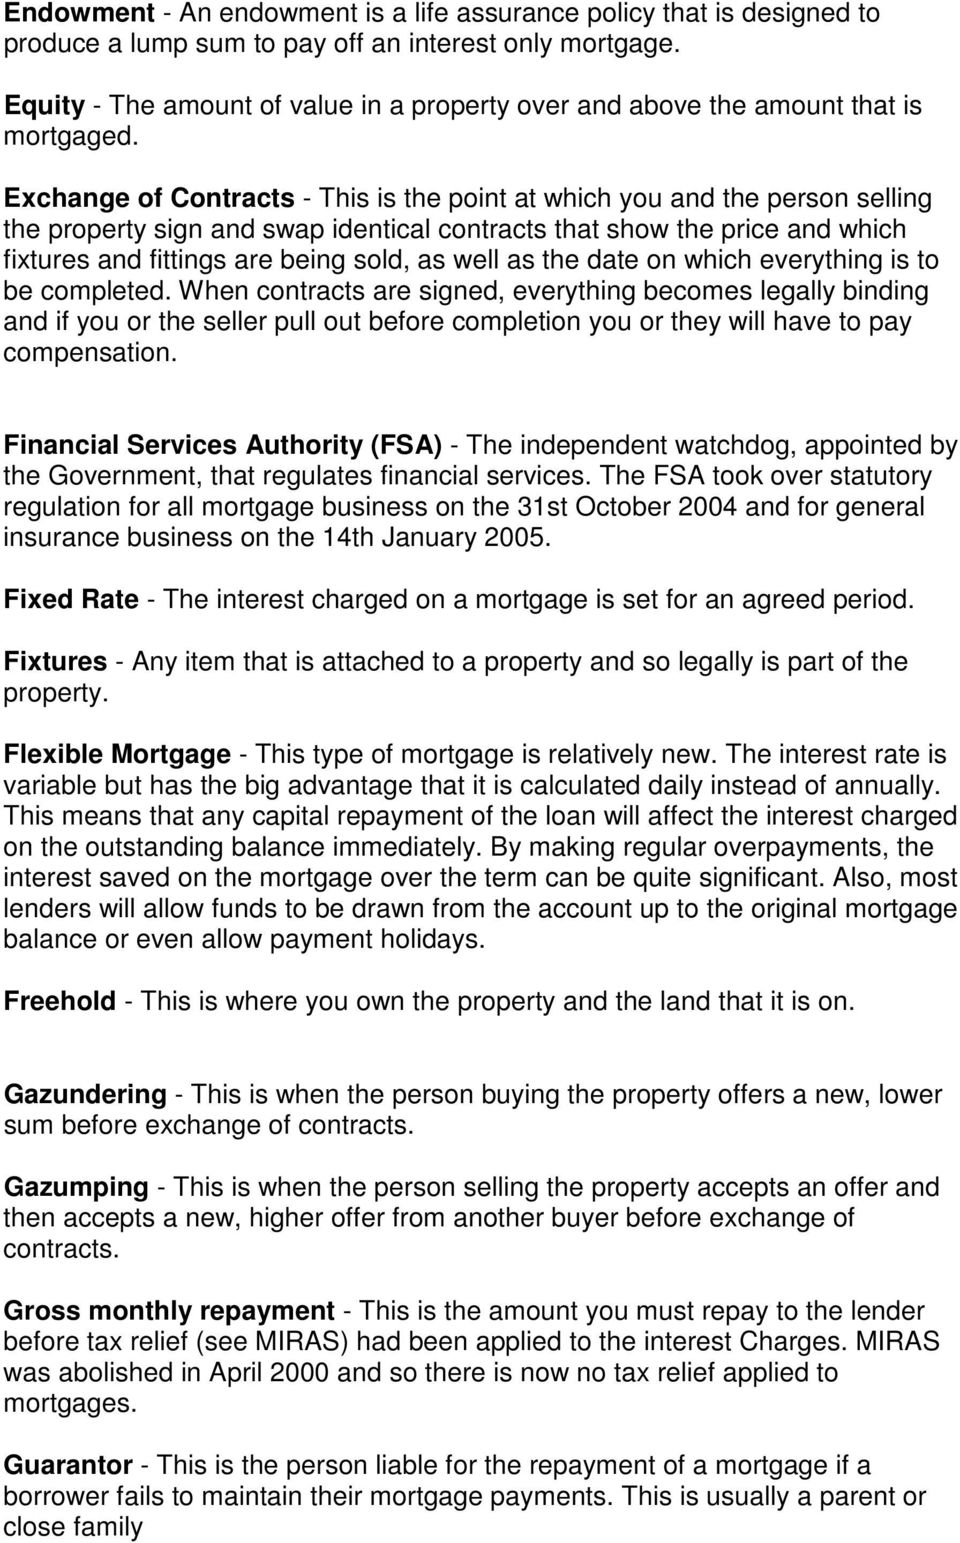 Exchange of Contracts - This is the point at which you and the person selling the property sign and swap identical contracts that show the price and which fixtures and fittings are being sold, as